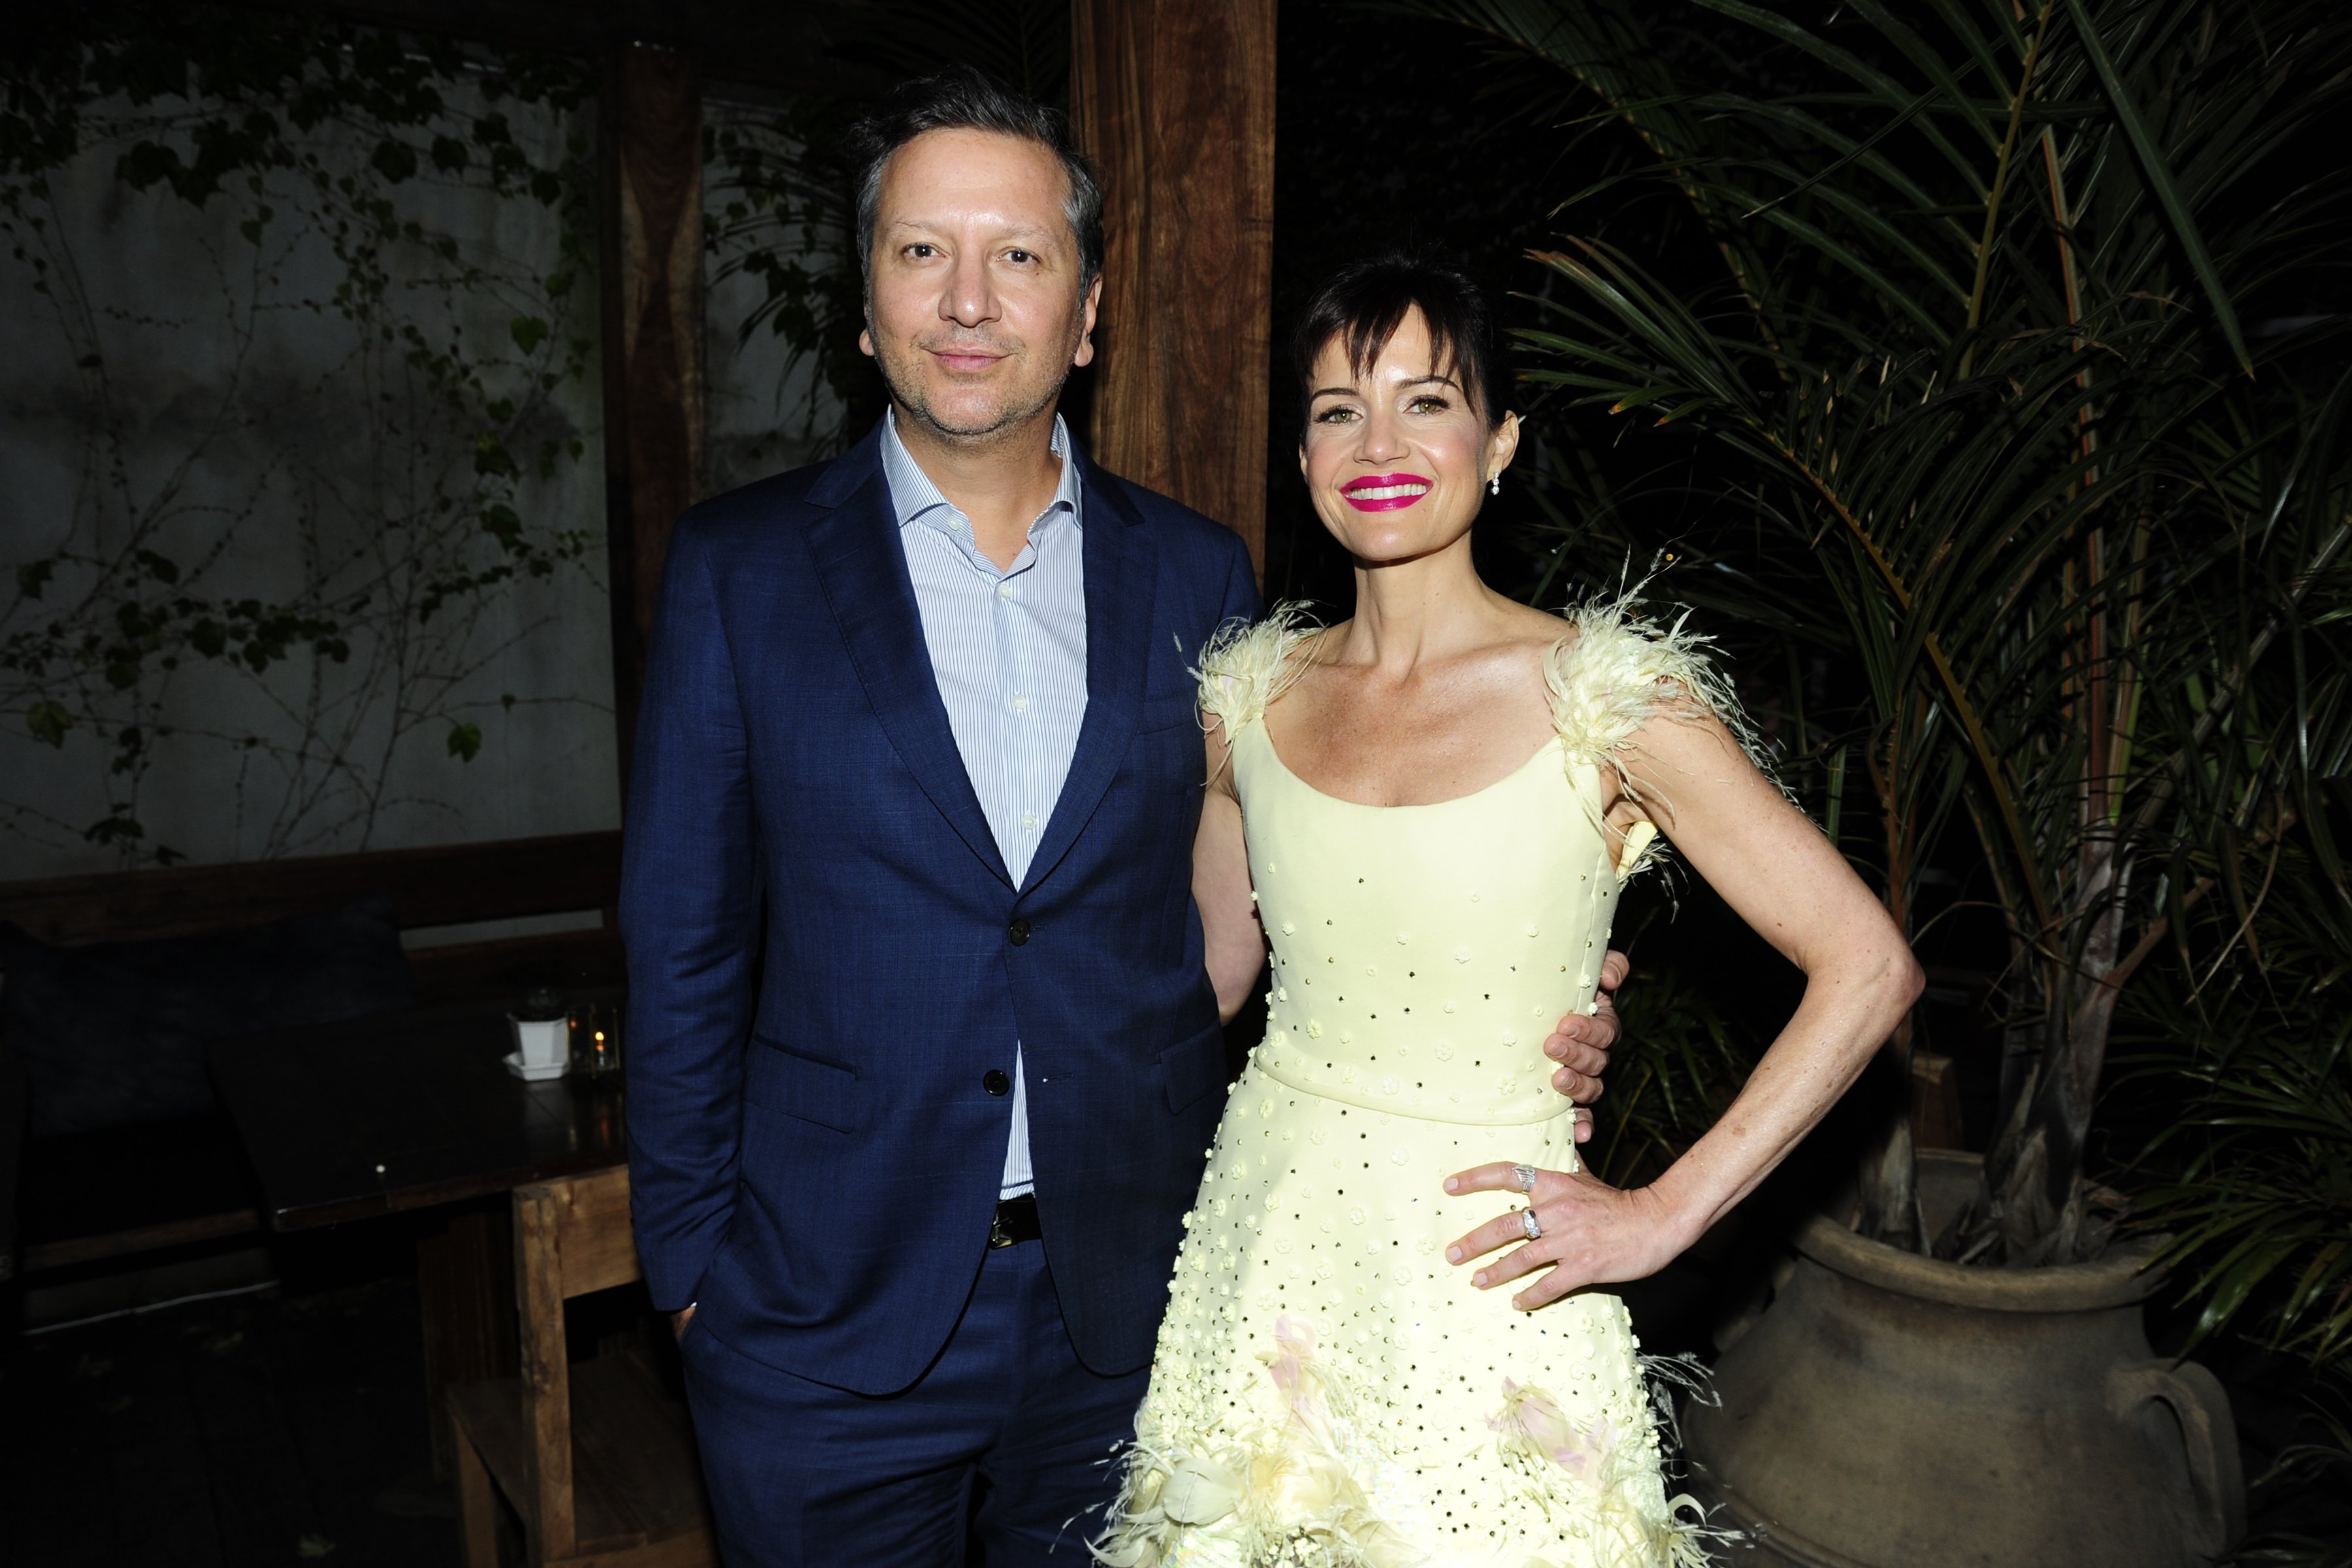 Sebastian Gutierrez and Carla Gugino at the Cinemax and the Cinema Society's after-party for the "Jett"  series on June 11, 2019, in New York City. | Source: Getty Images